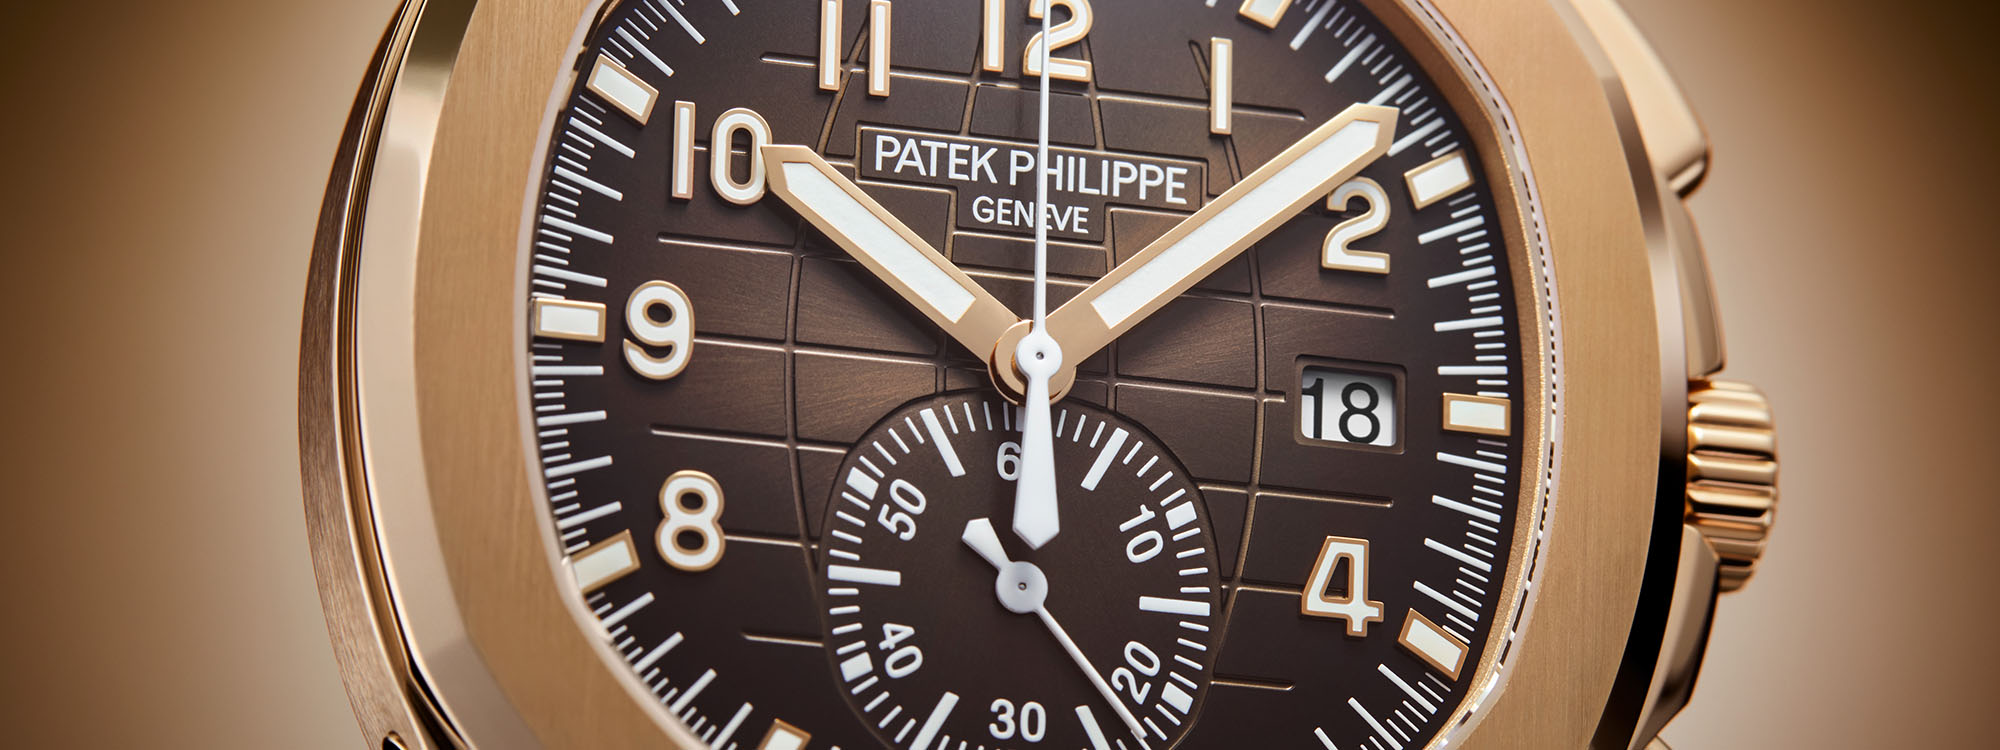 Patek Philippe Aquanaut Review: A Comprehensive Guide to the Luxury Sport Watch